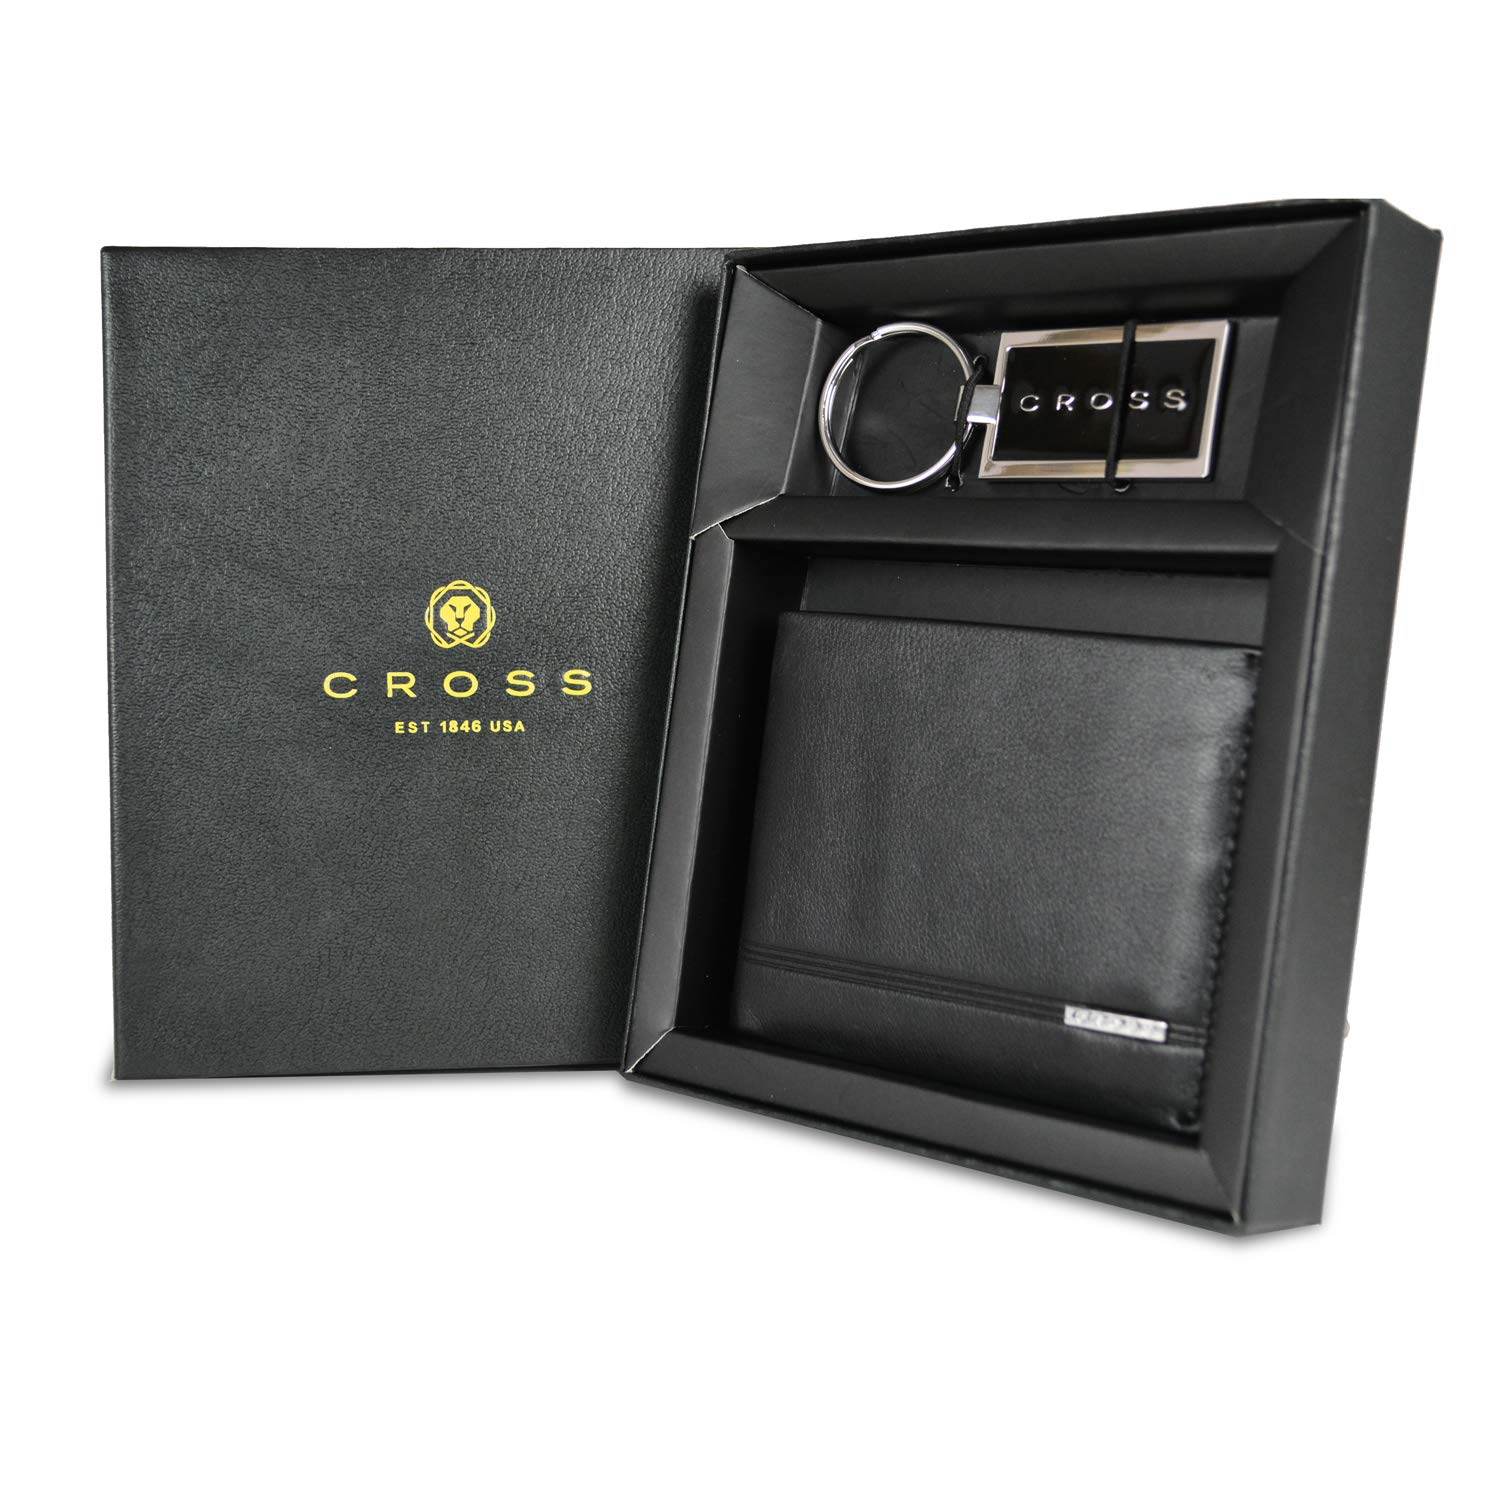 Click to open expanded view Cross Classic Century Compact Wallet and Key Chain Gift Set